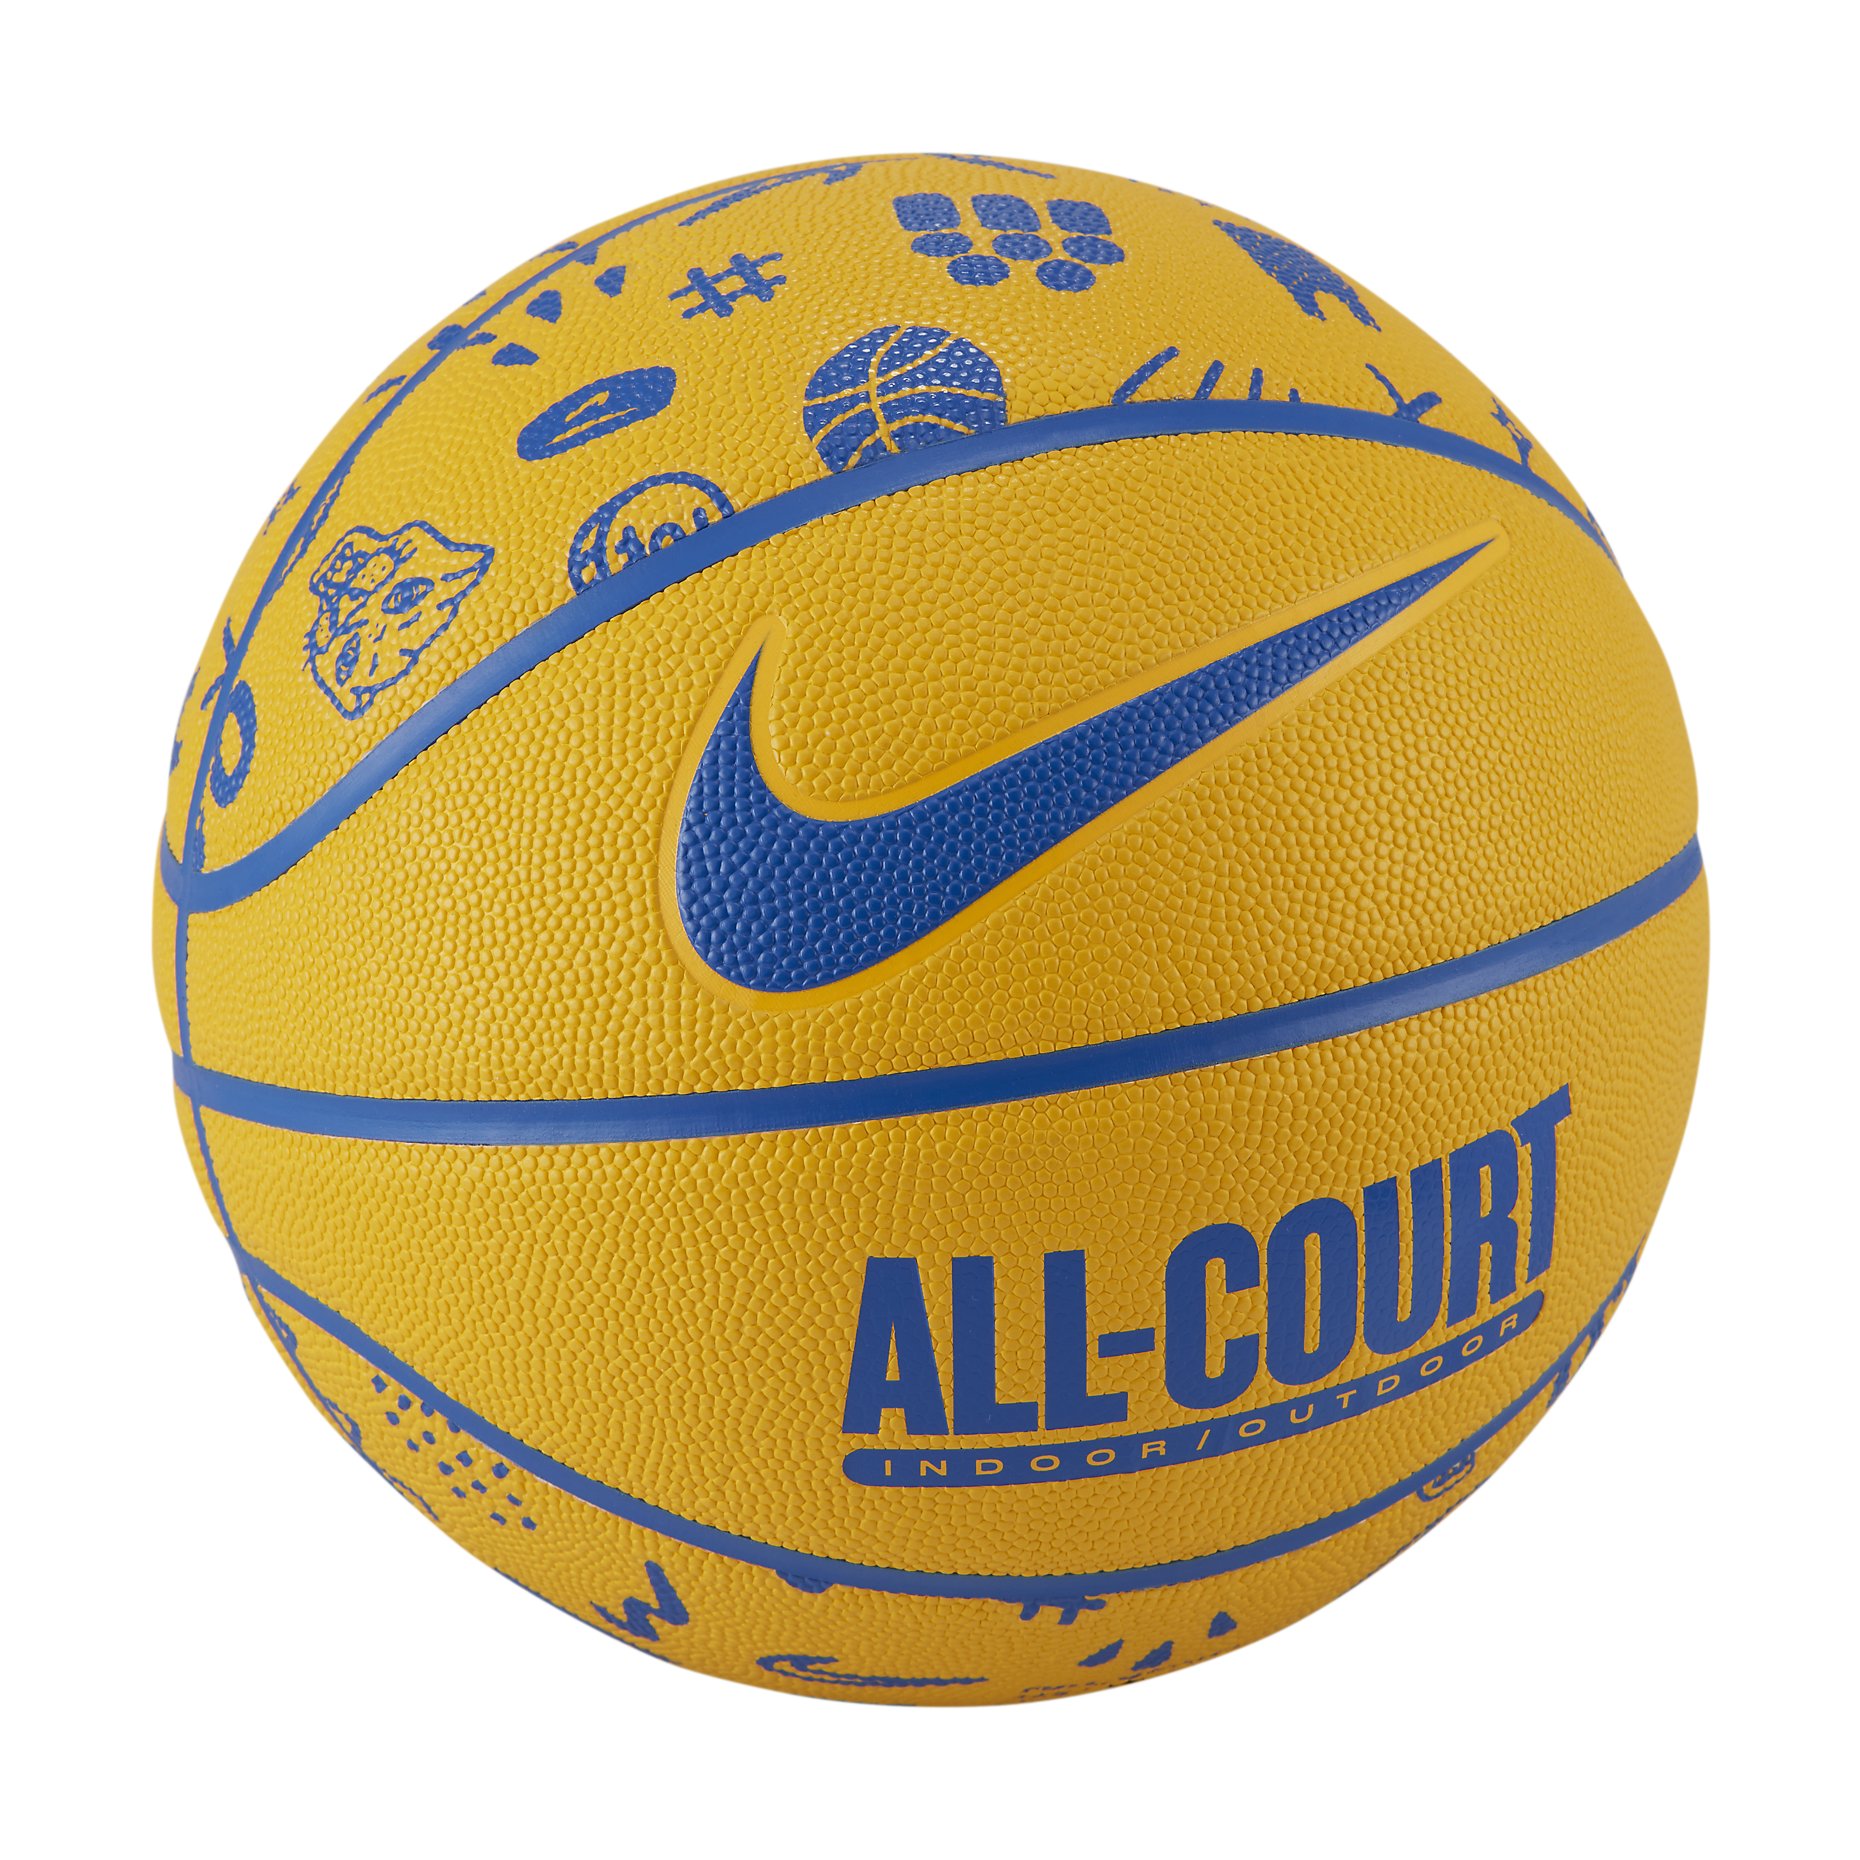 NIKE-特许装备 NIKE-特许装备 NIKE 特许装备 NIKE EVERYDAY ALL COURT 8P GRAPHIC DEFLATED篮球+22Q3+男性  DO8259-721 DO8259-721